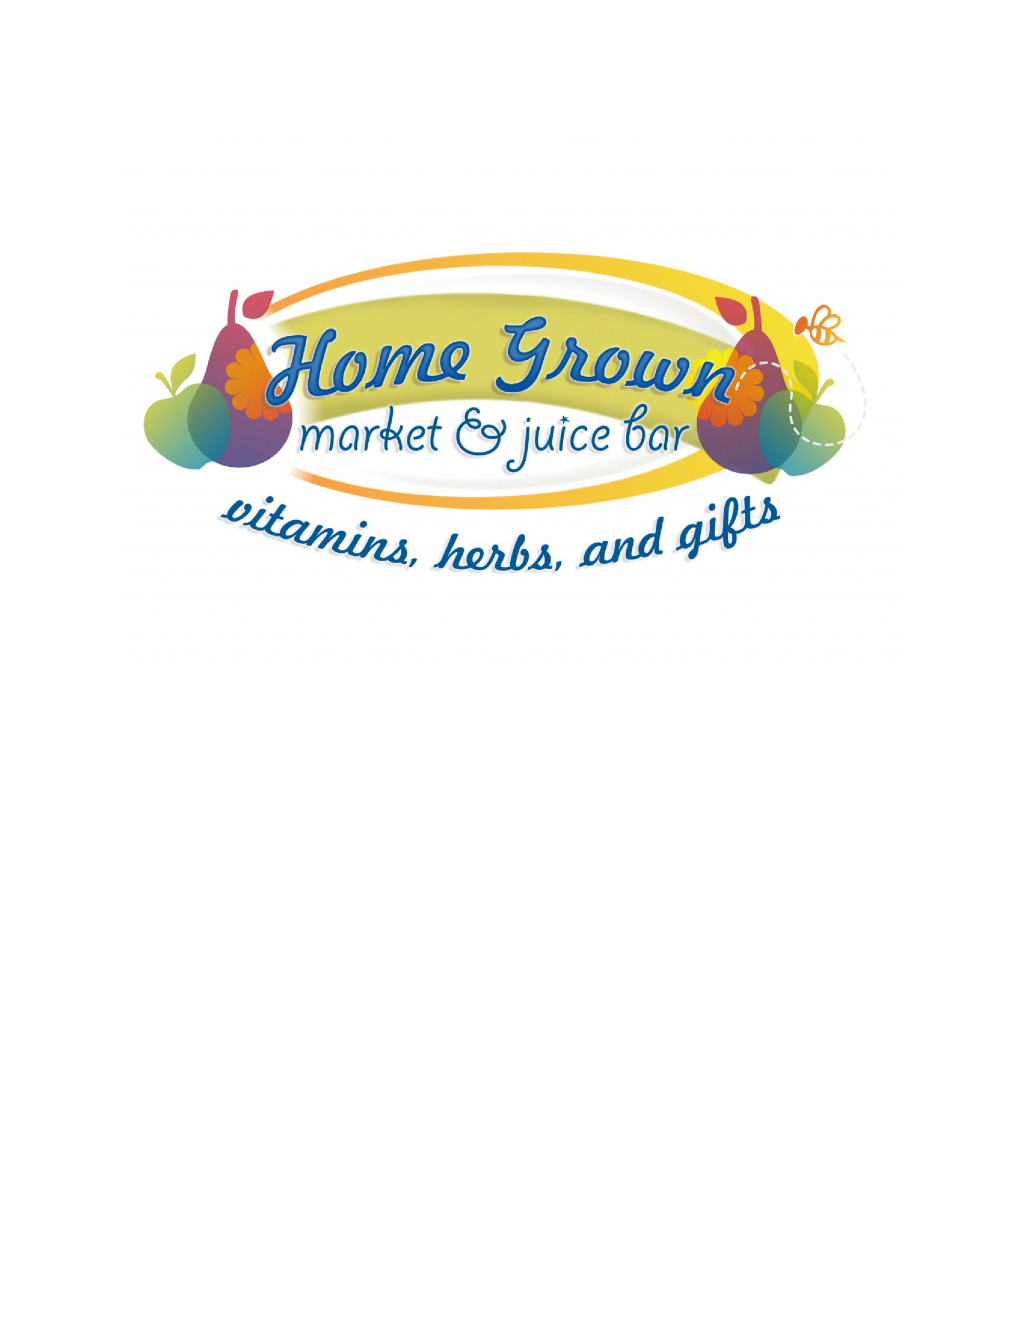 Home grown (1).png